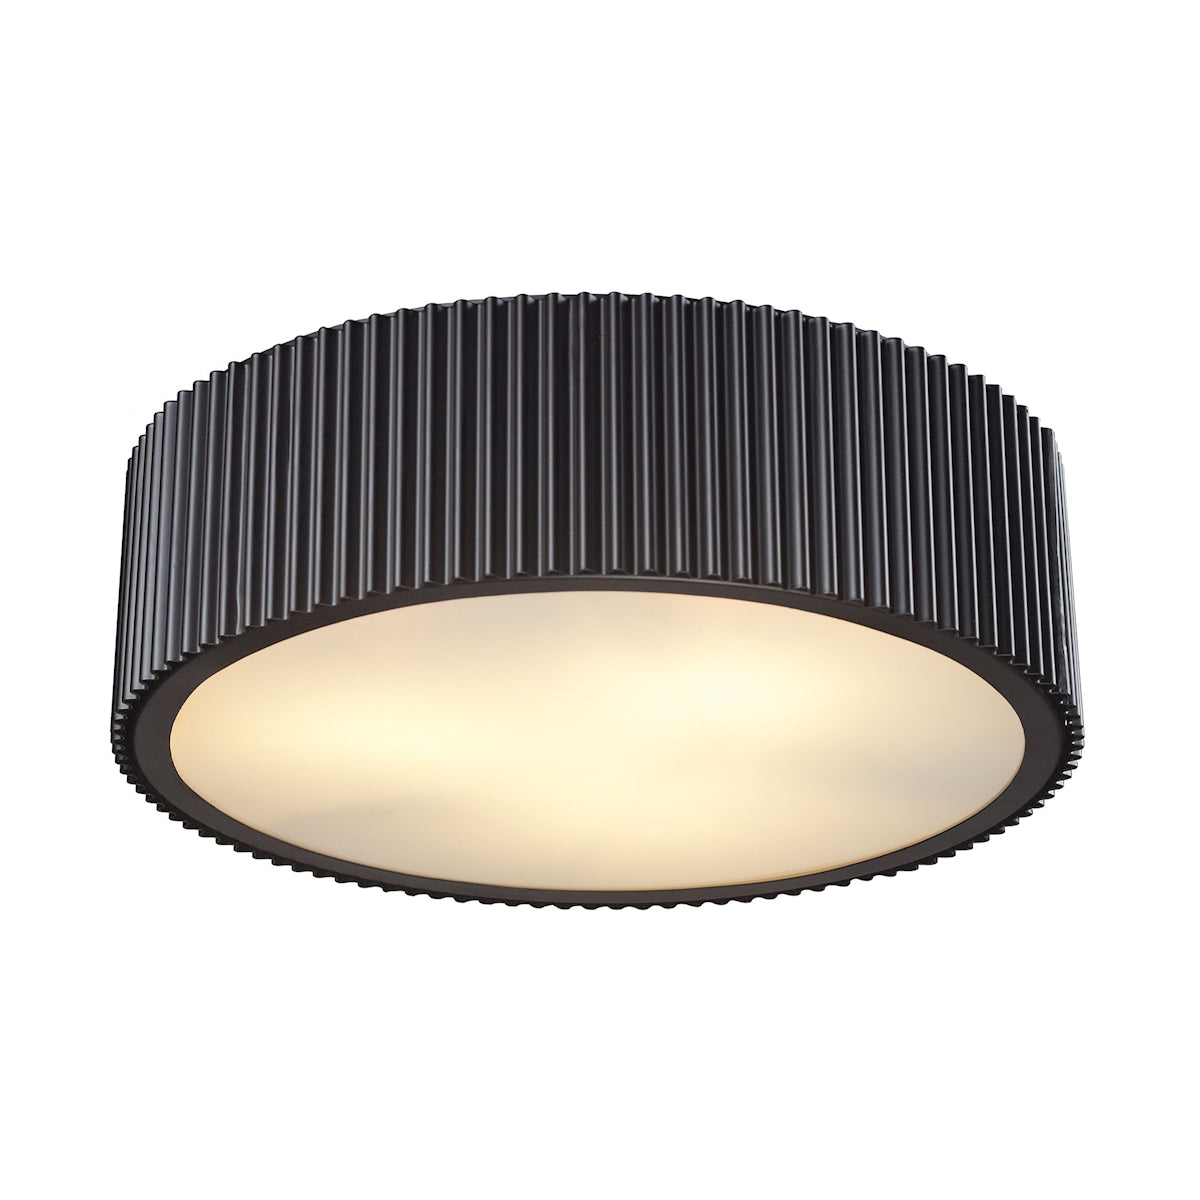 ELK Lighting 66419/3 - Brendon 17" Wide 3-Light Flush Mount in Oil Rubbed Bronze with Diffuser